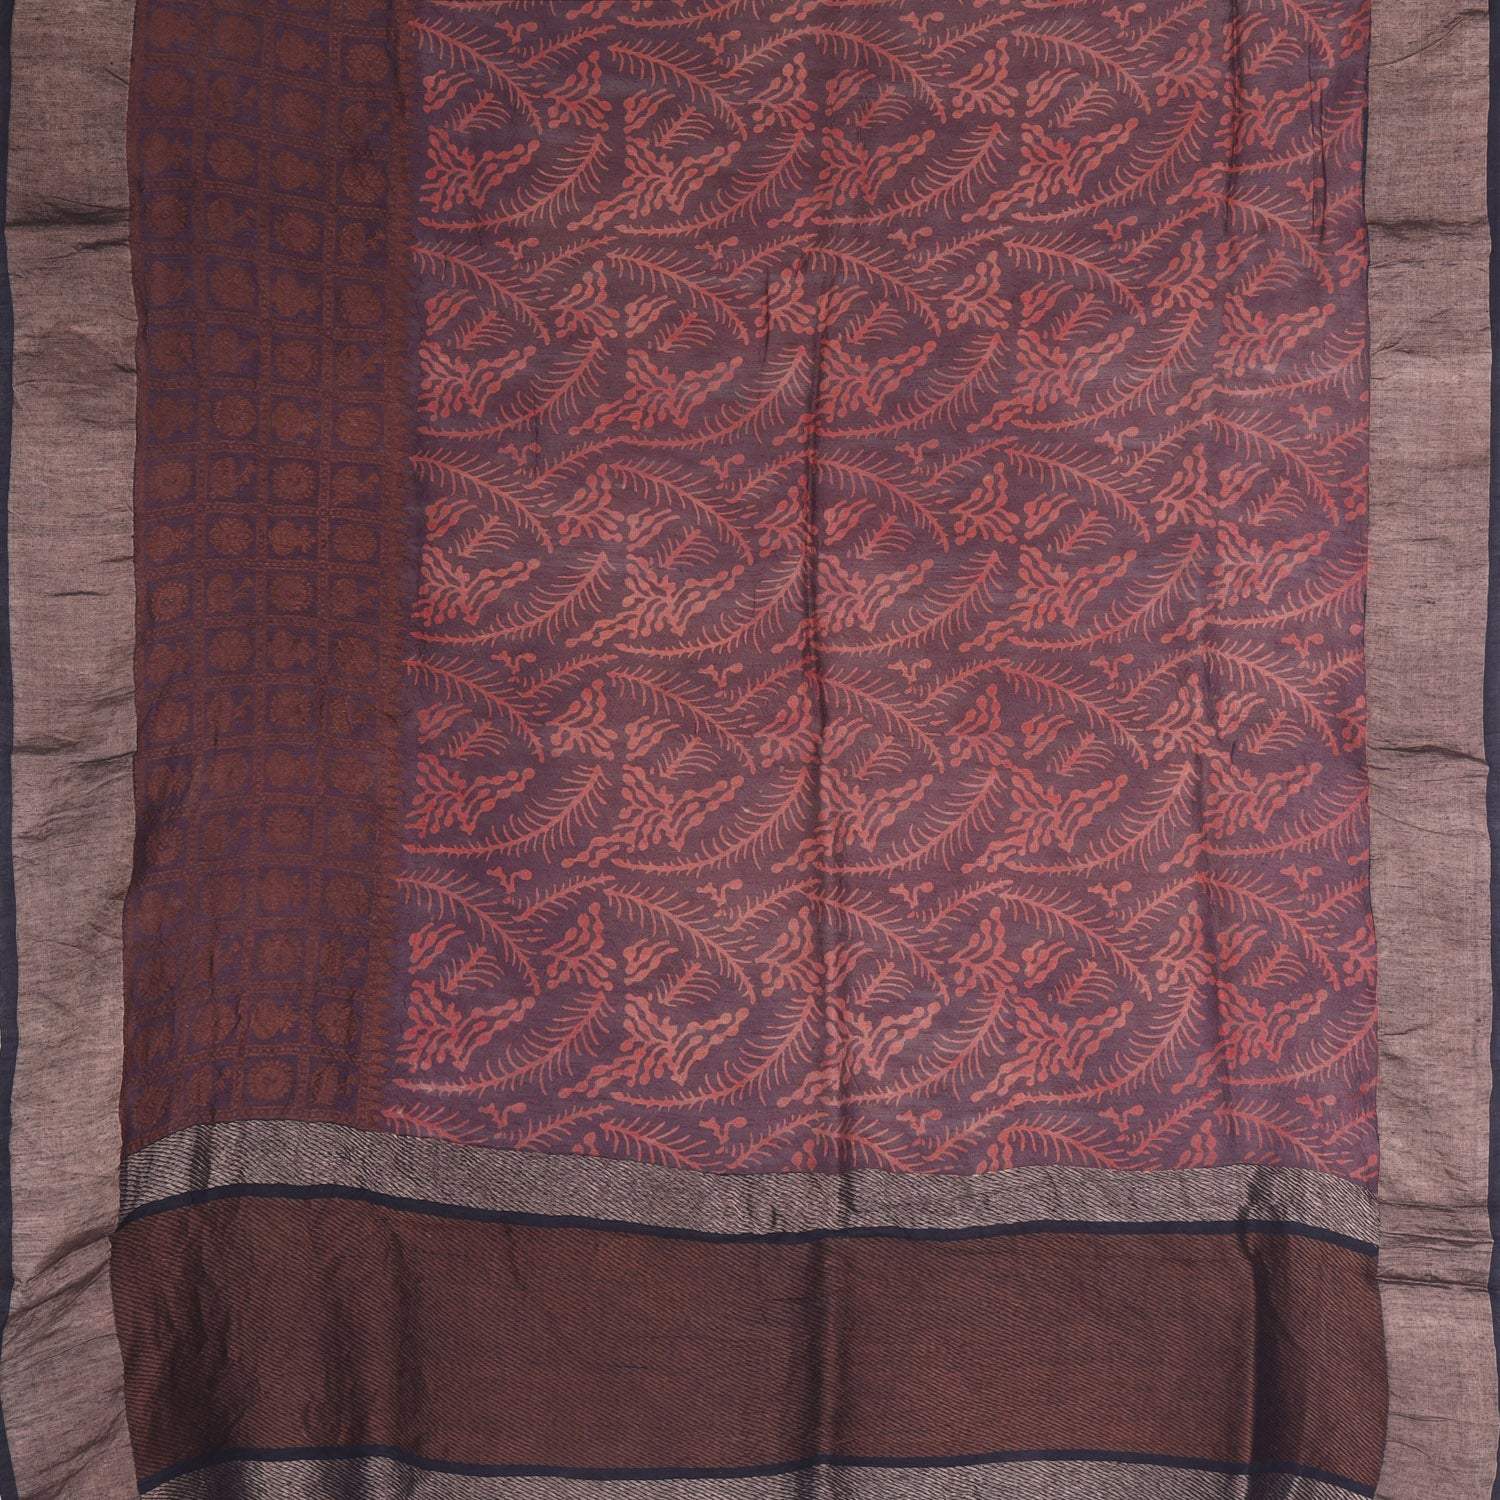 Pastel Brown Matka Silk Saree With Floral Printed Motifs - Singhania's